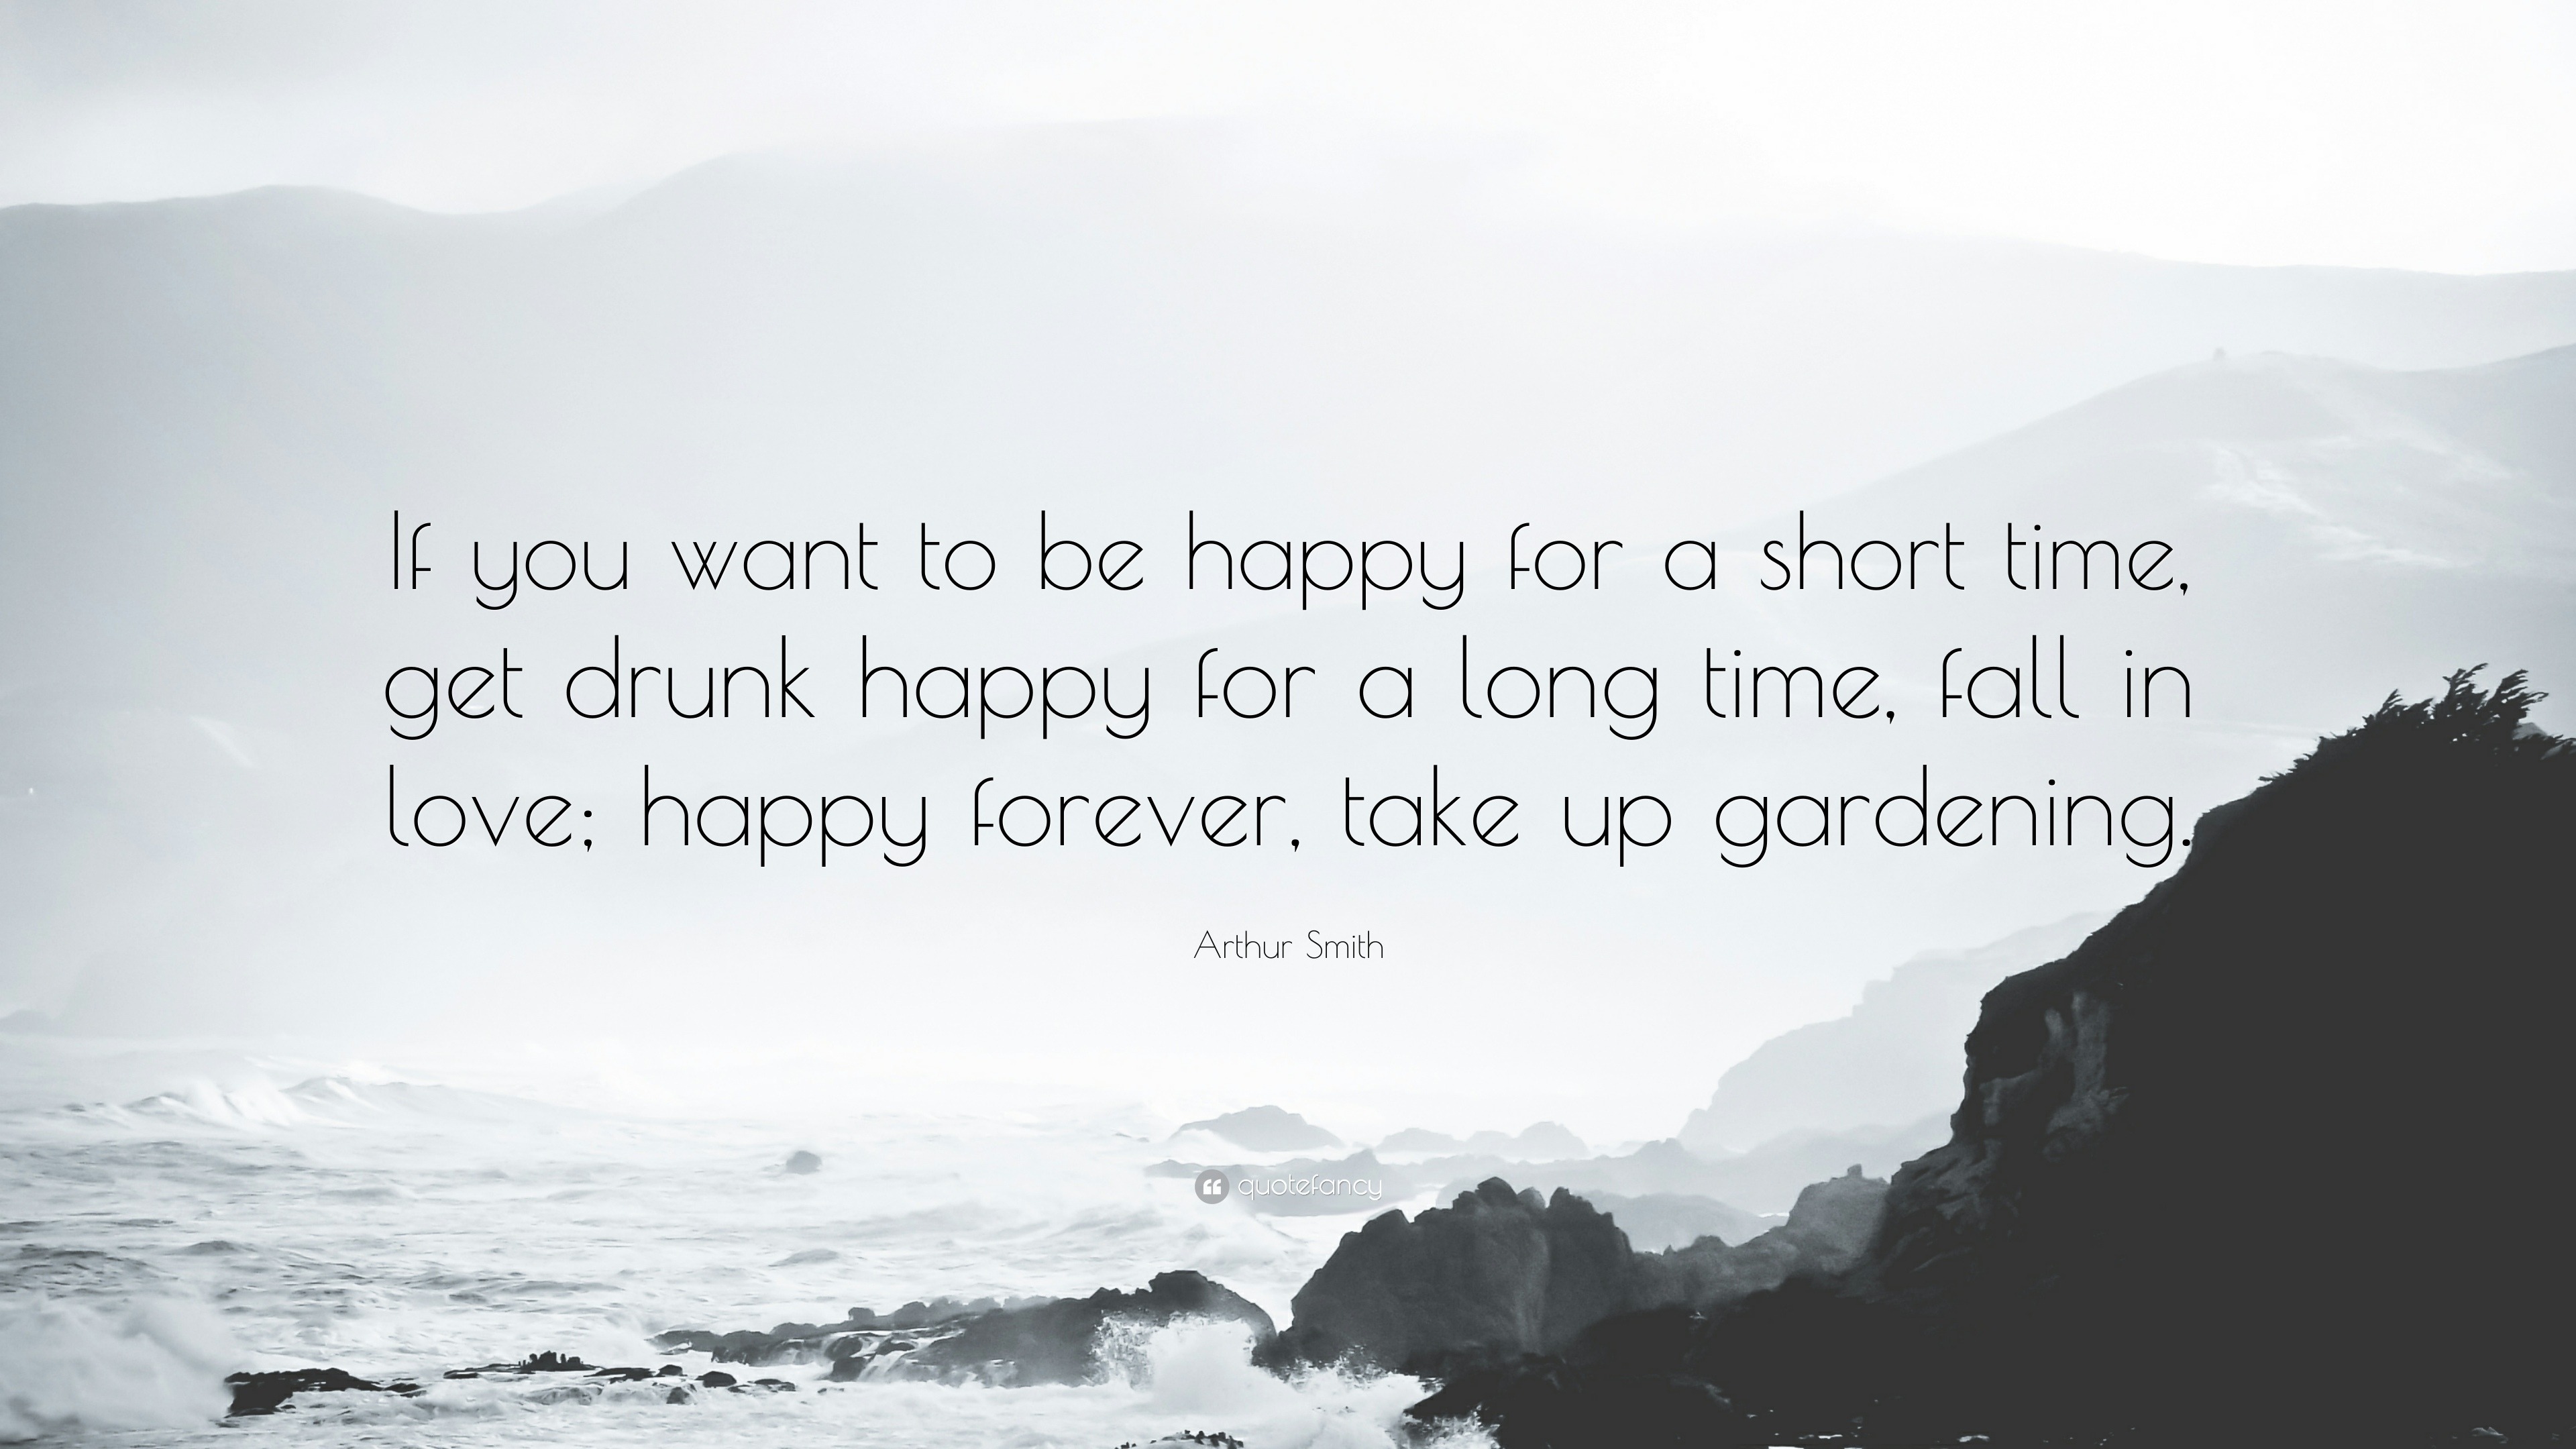 Arthur Smith Quote “If you want to be happy for a short time